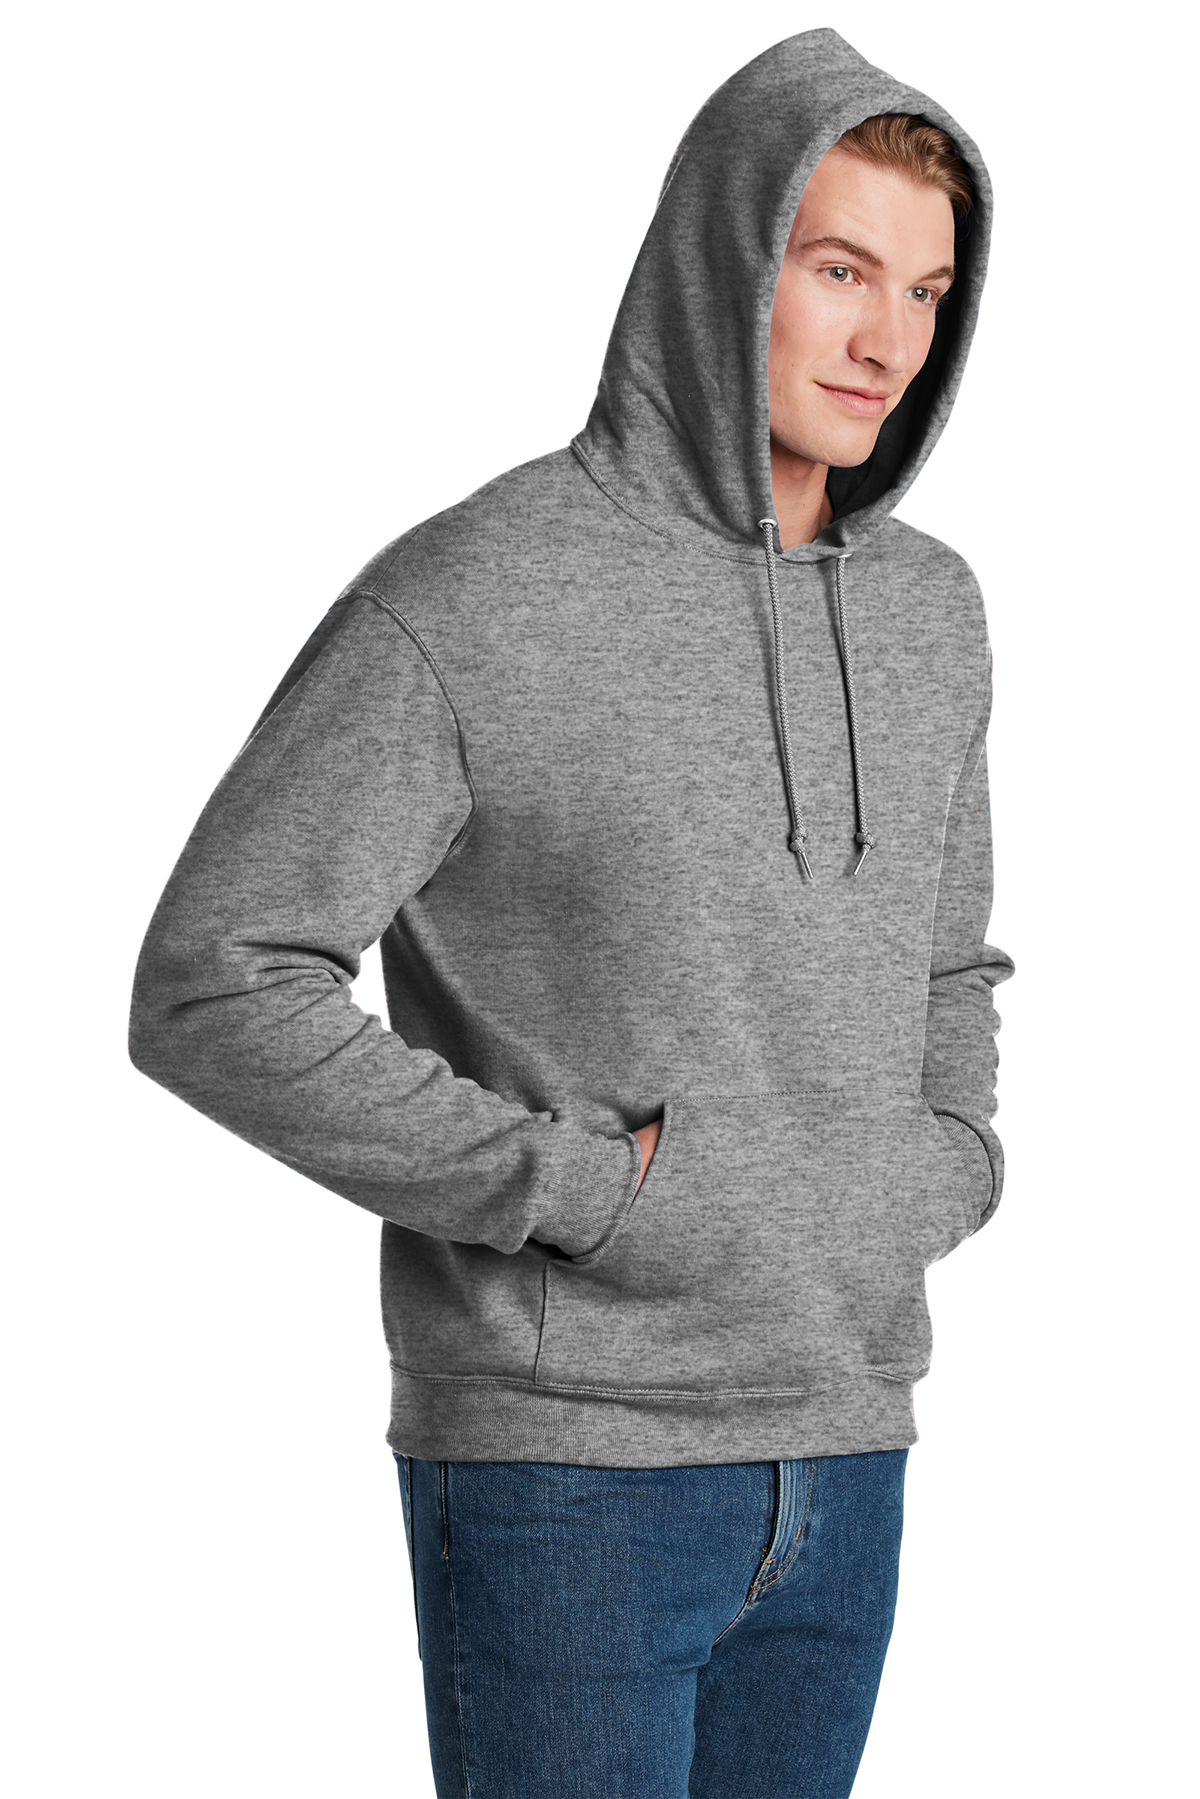 Jerzees - NuBlend Pullover Hooded Sweatshirt | Product | Company Casuals